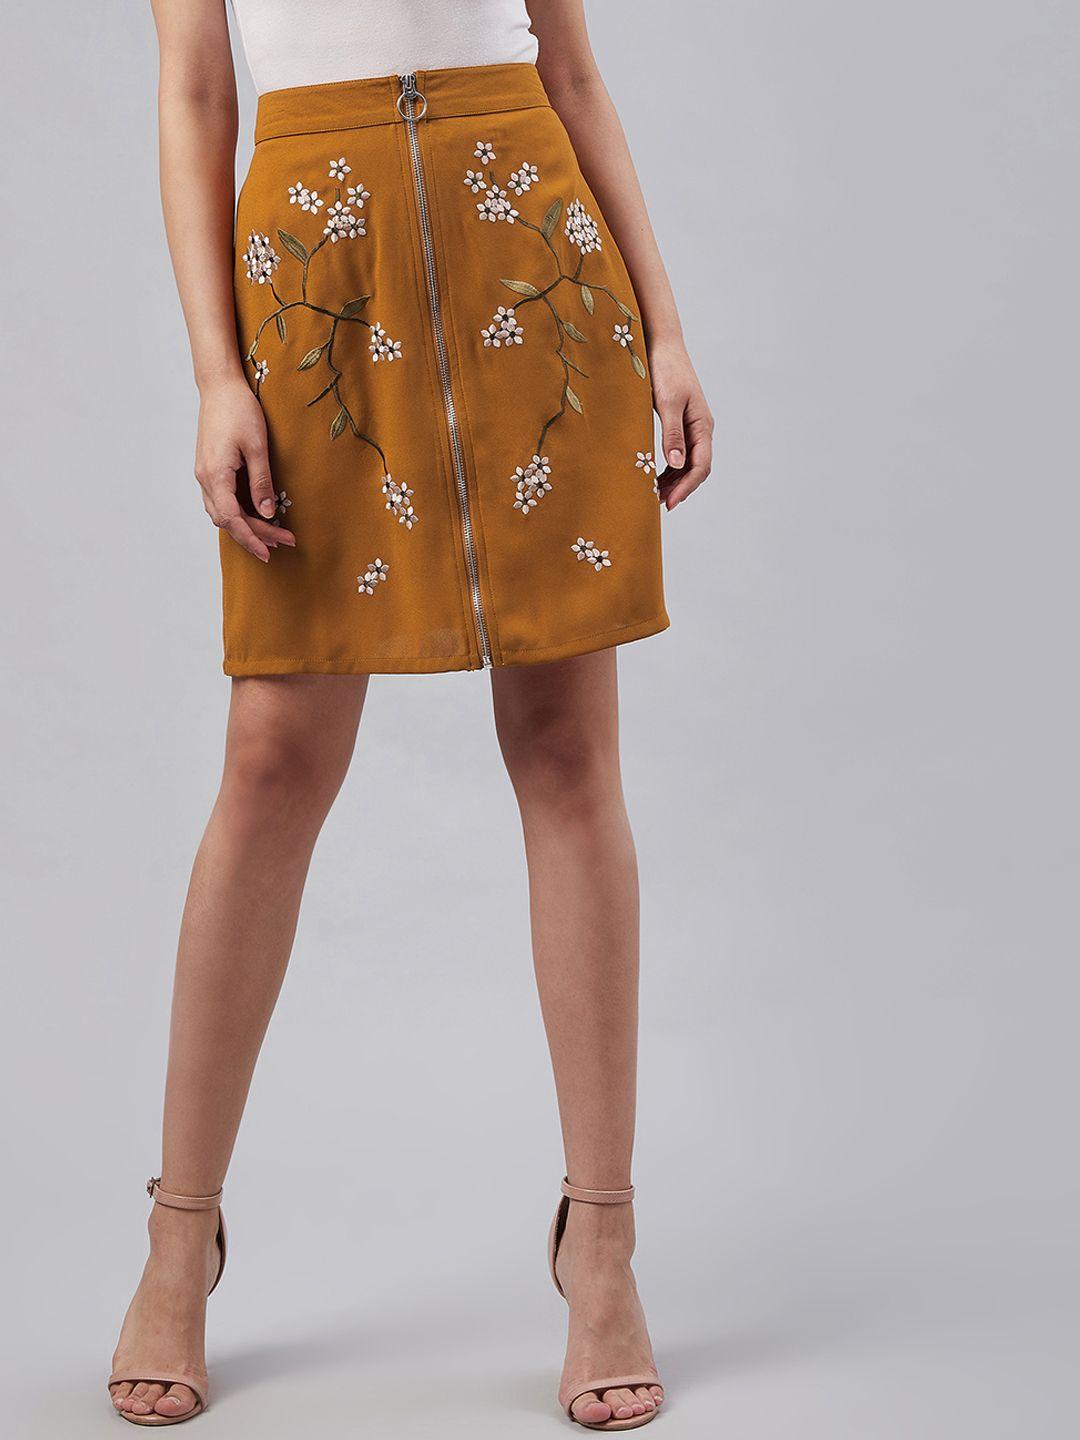 marie claire women mustard brown & white floral embroidered a-line mini skirt